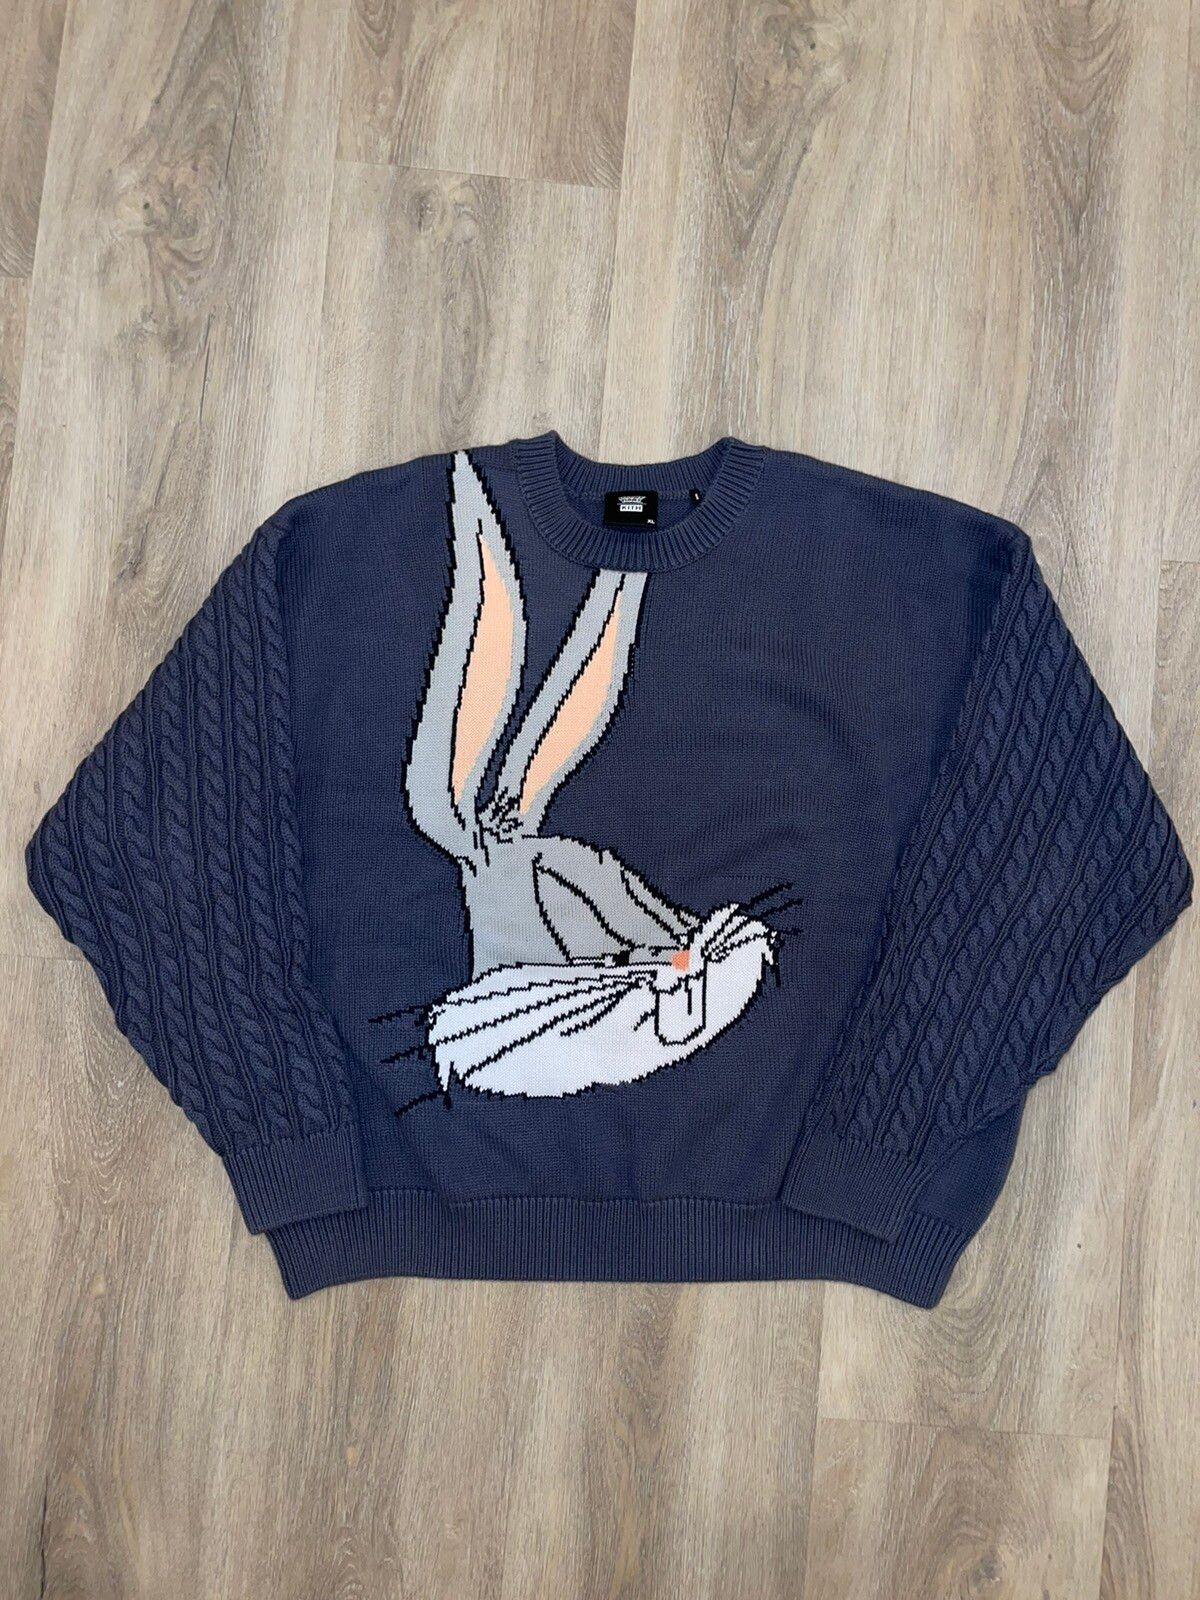 Kith Kith x Looney Tunes Sweater | Grailed